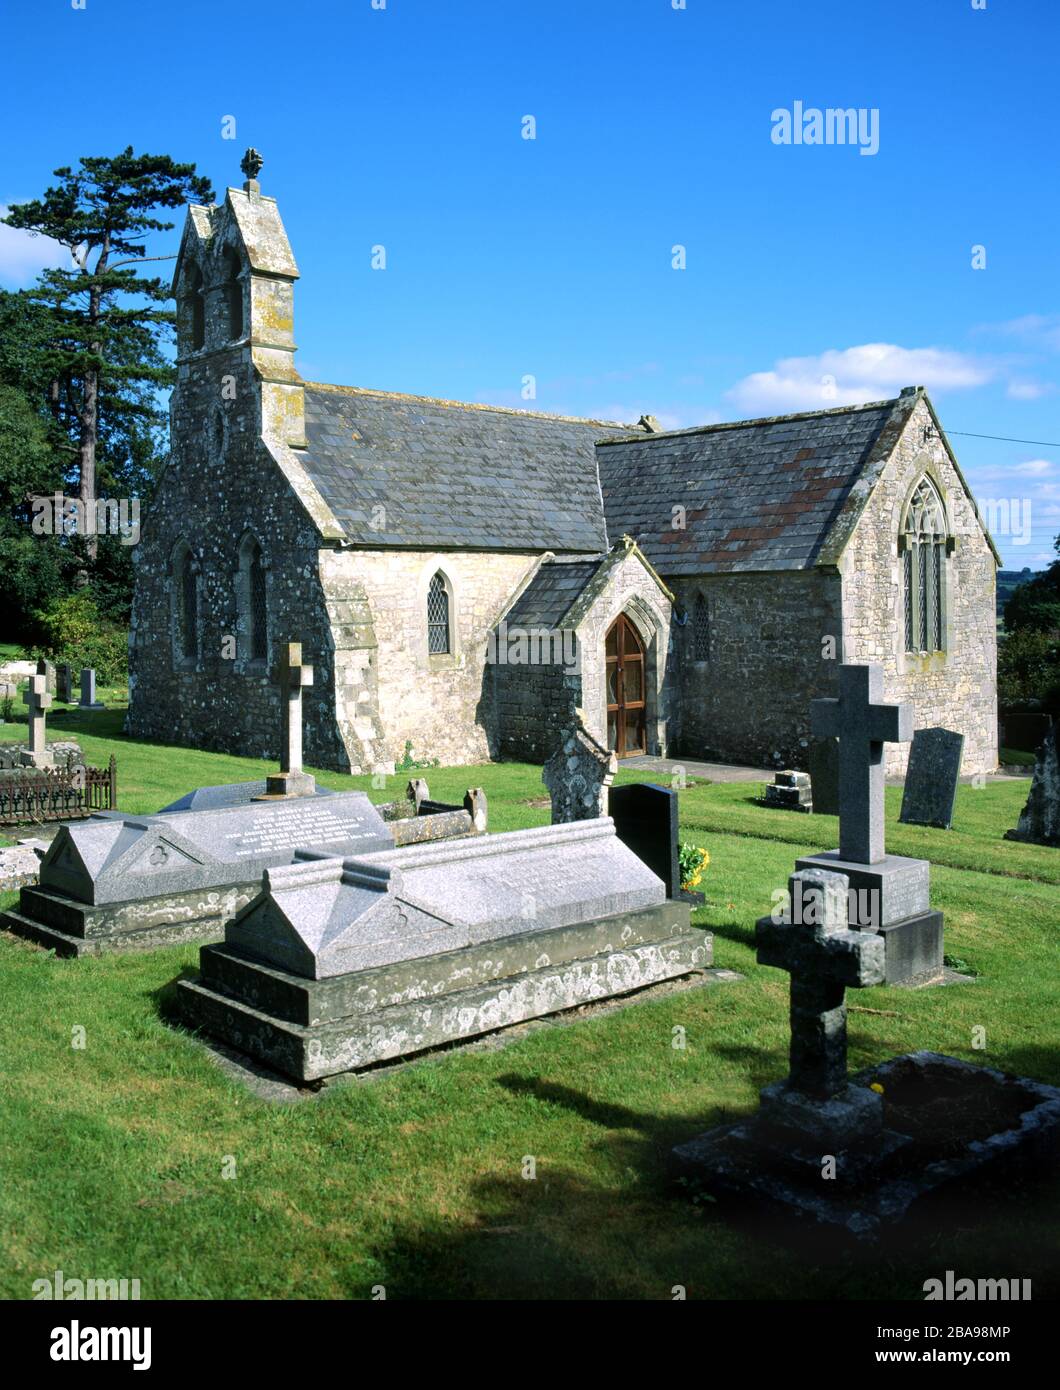 St Michael Church burial place of Iolo Morganwg, Flemingston, Vale of Glamorgan, South Wales. Stock Photo